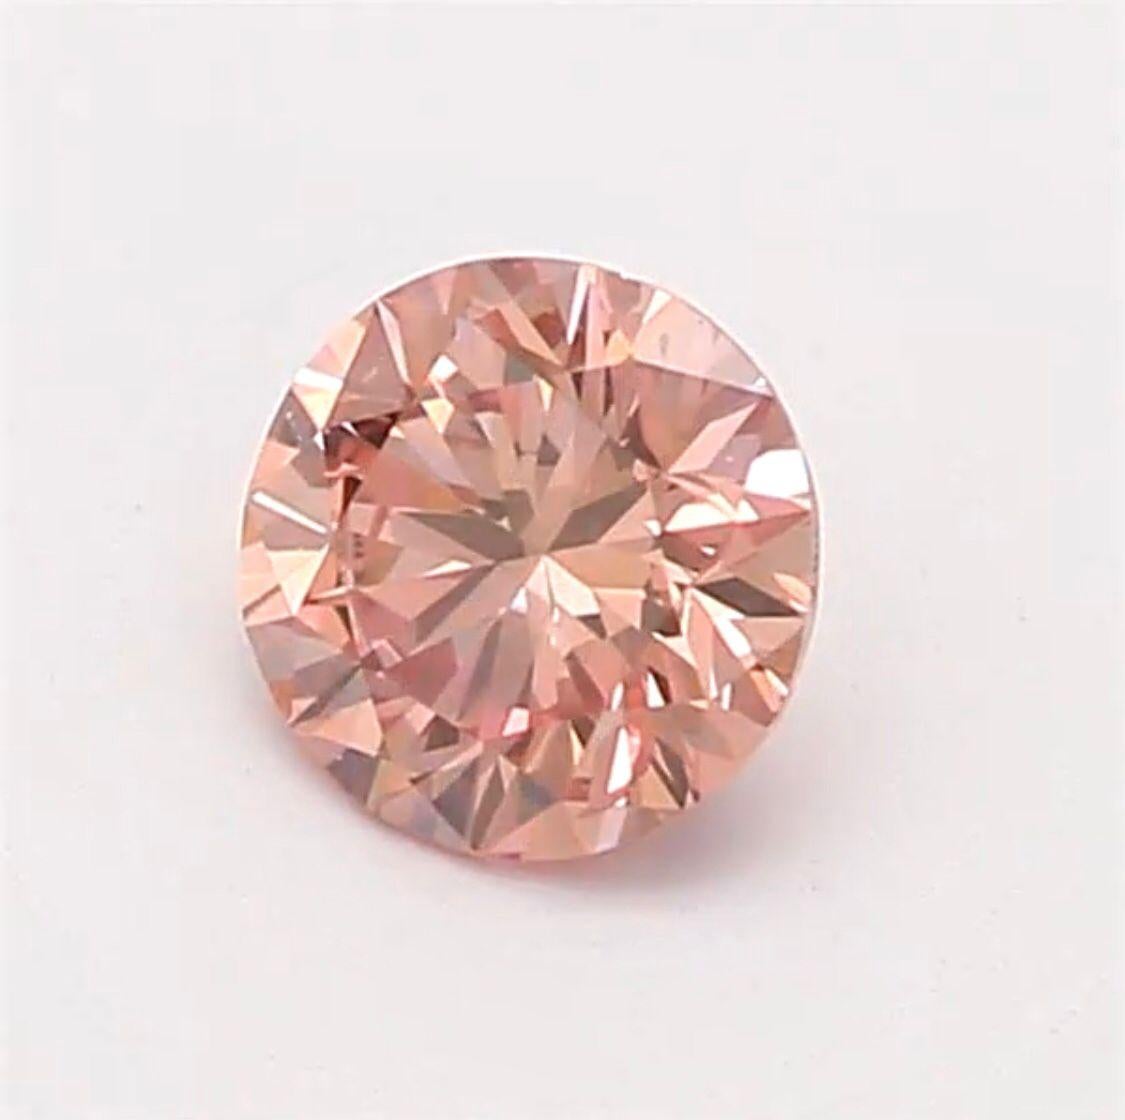 0.15 Carat Fancy Orangy Pink Round Shaped Diamond SI2 Clarity CGL Certified For Sale 4